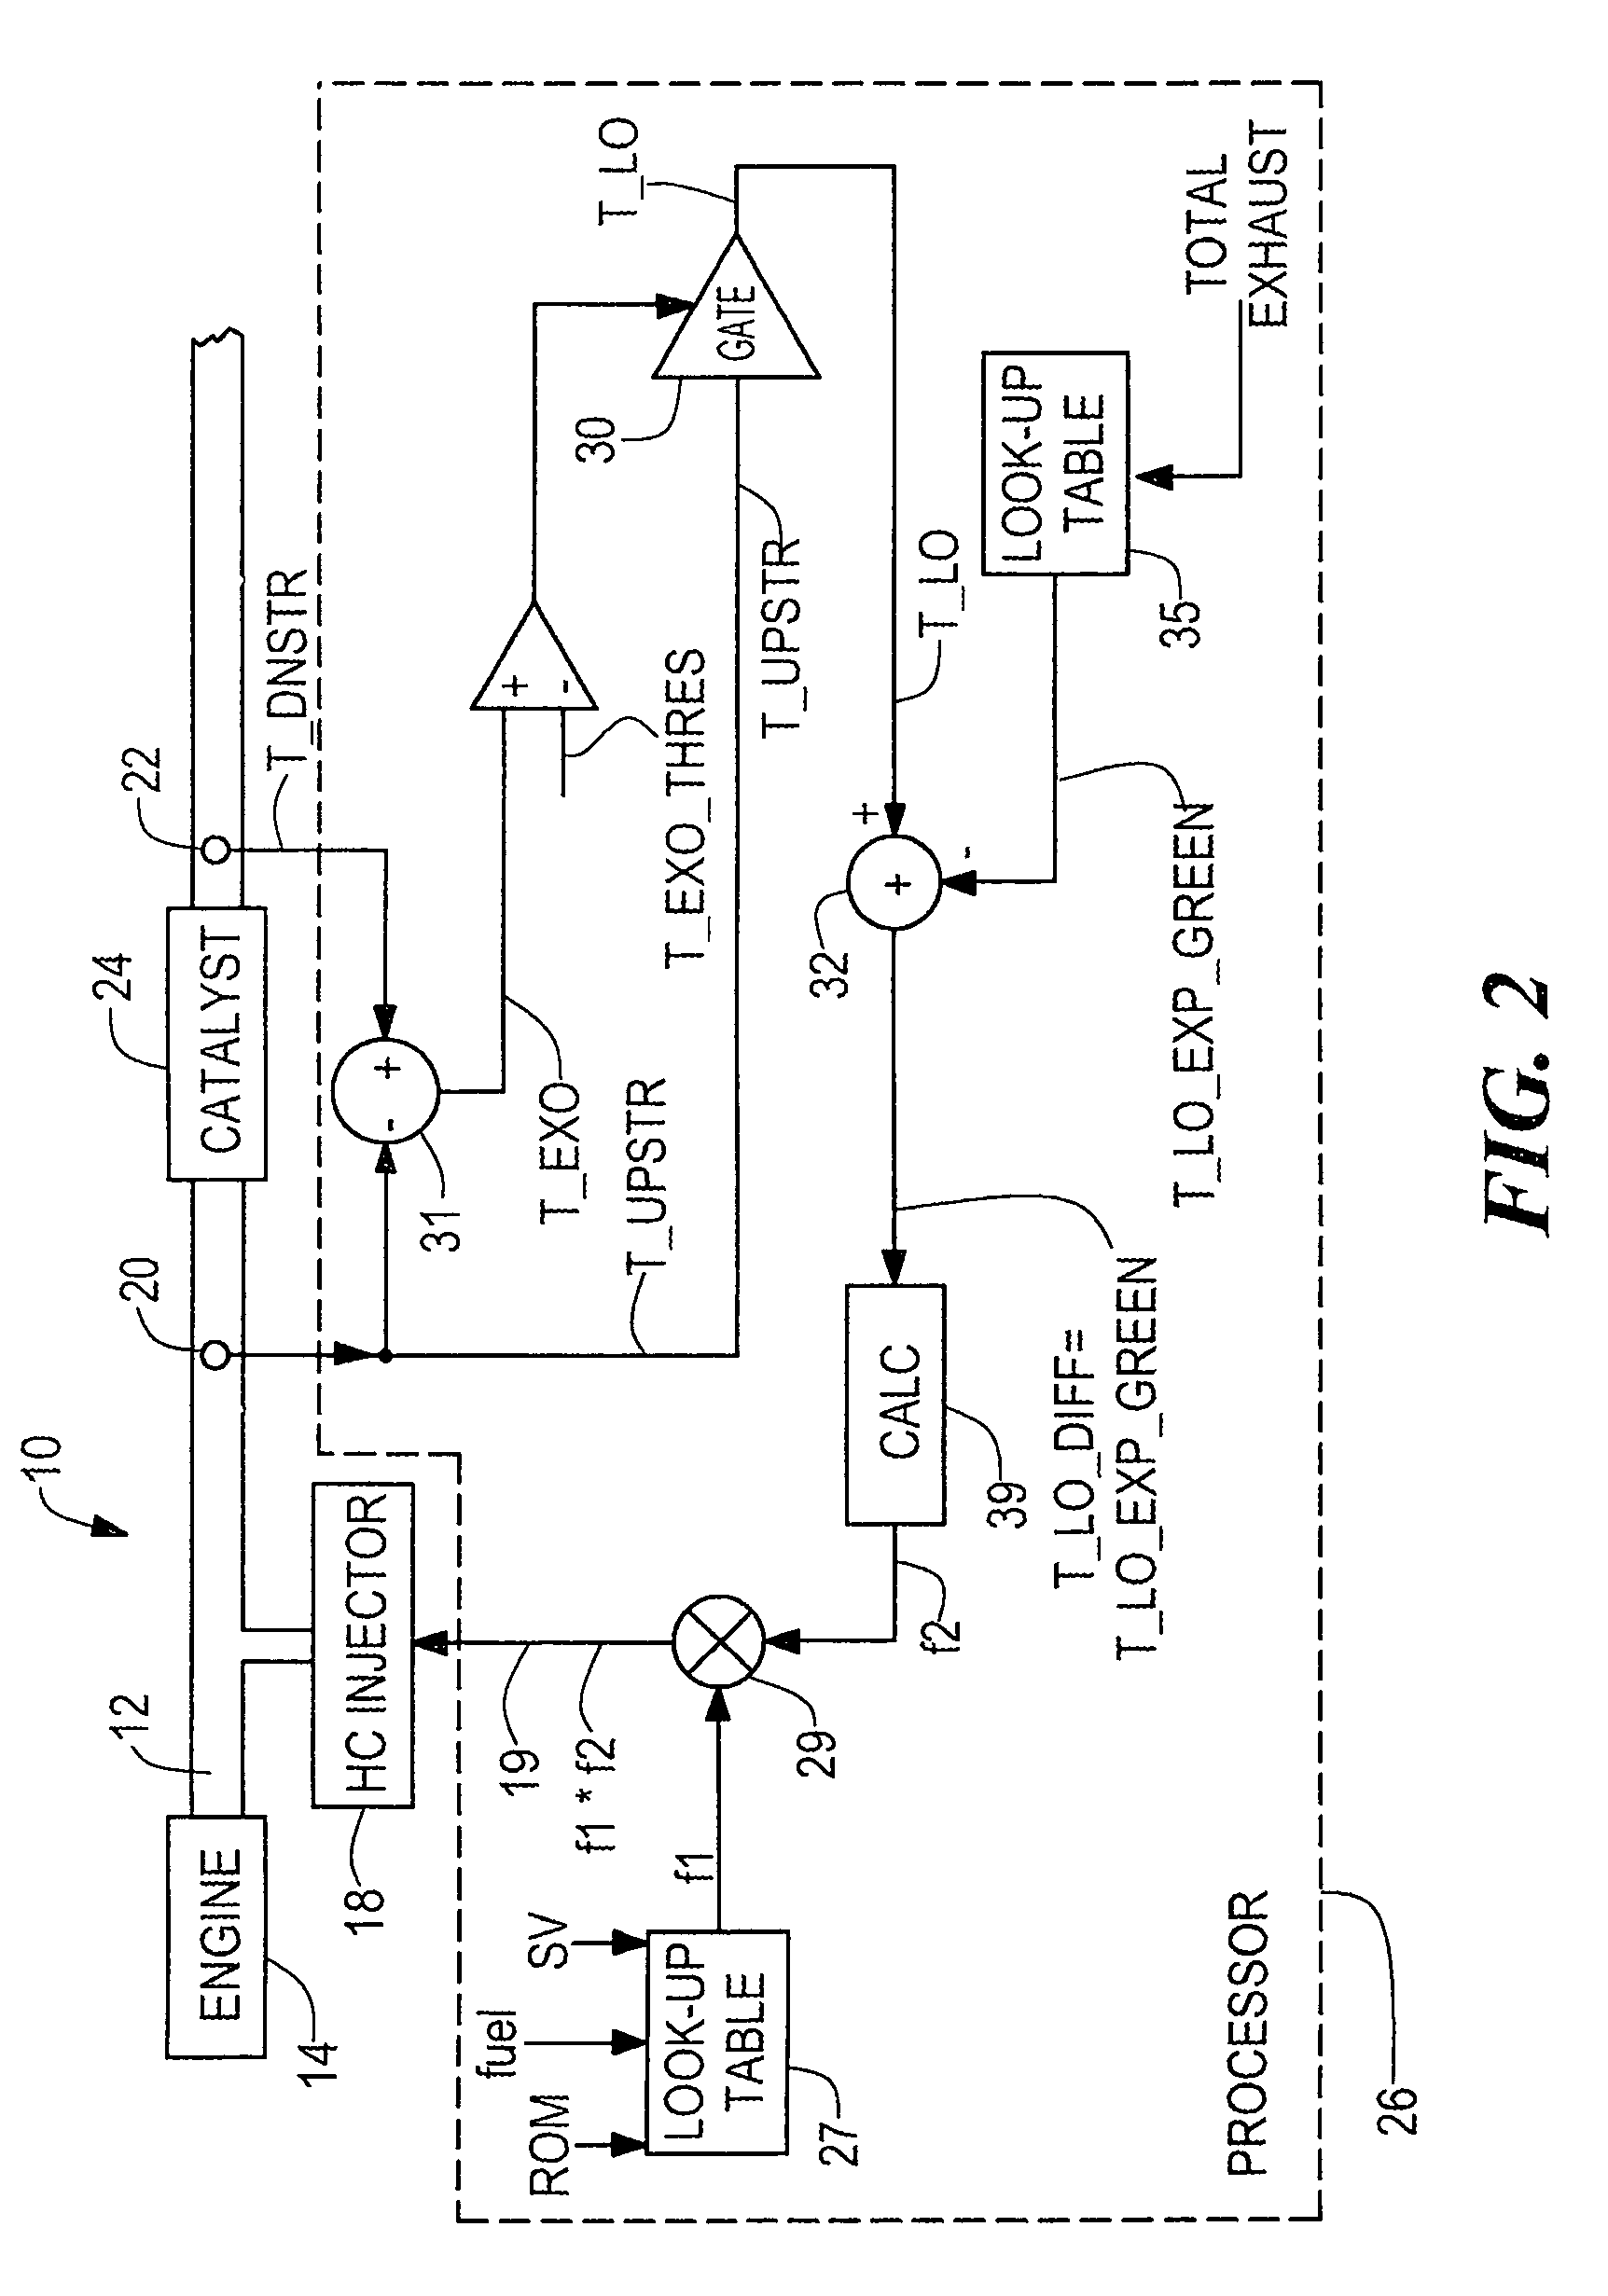 Method and apparatus for controlling hydrocarbon injection into engine exhaust to reduce NOx